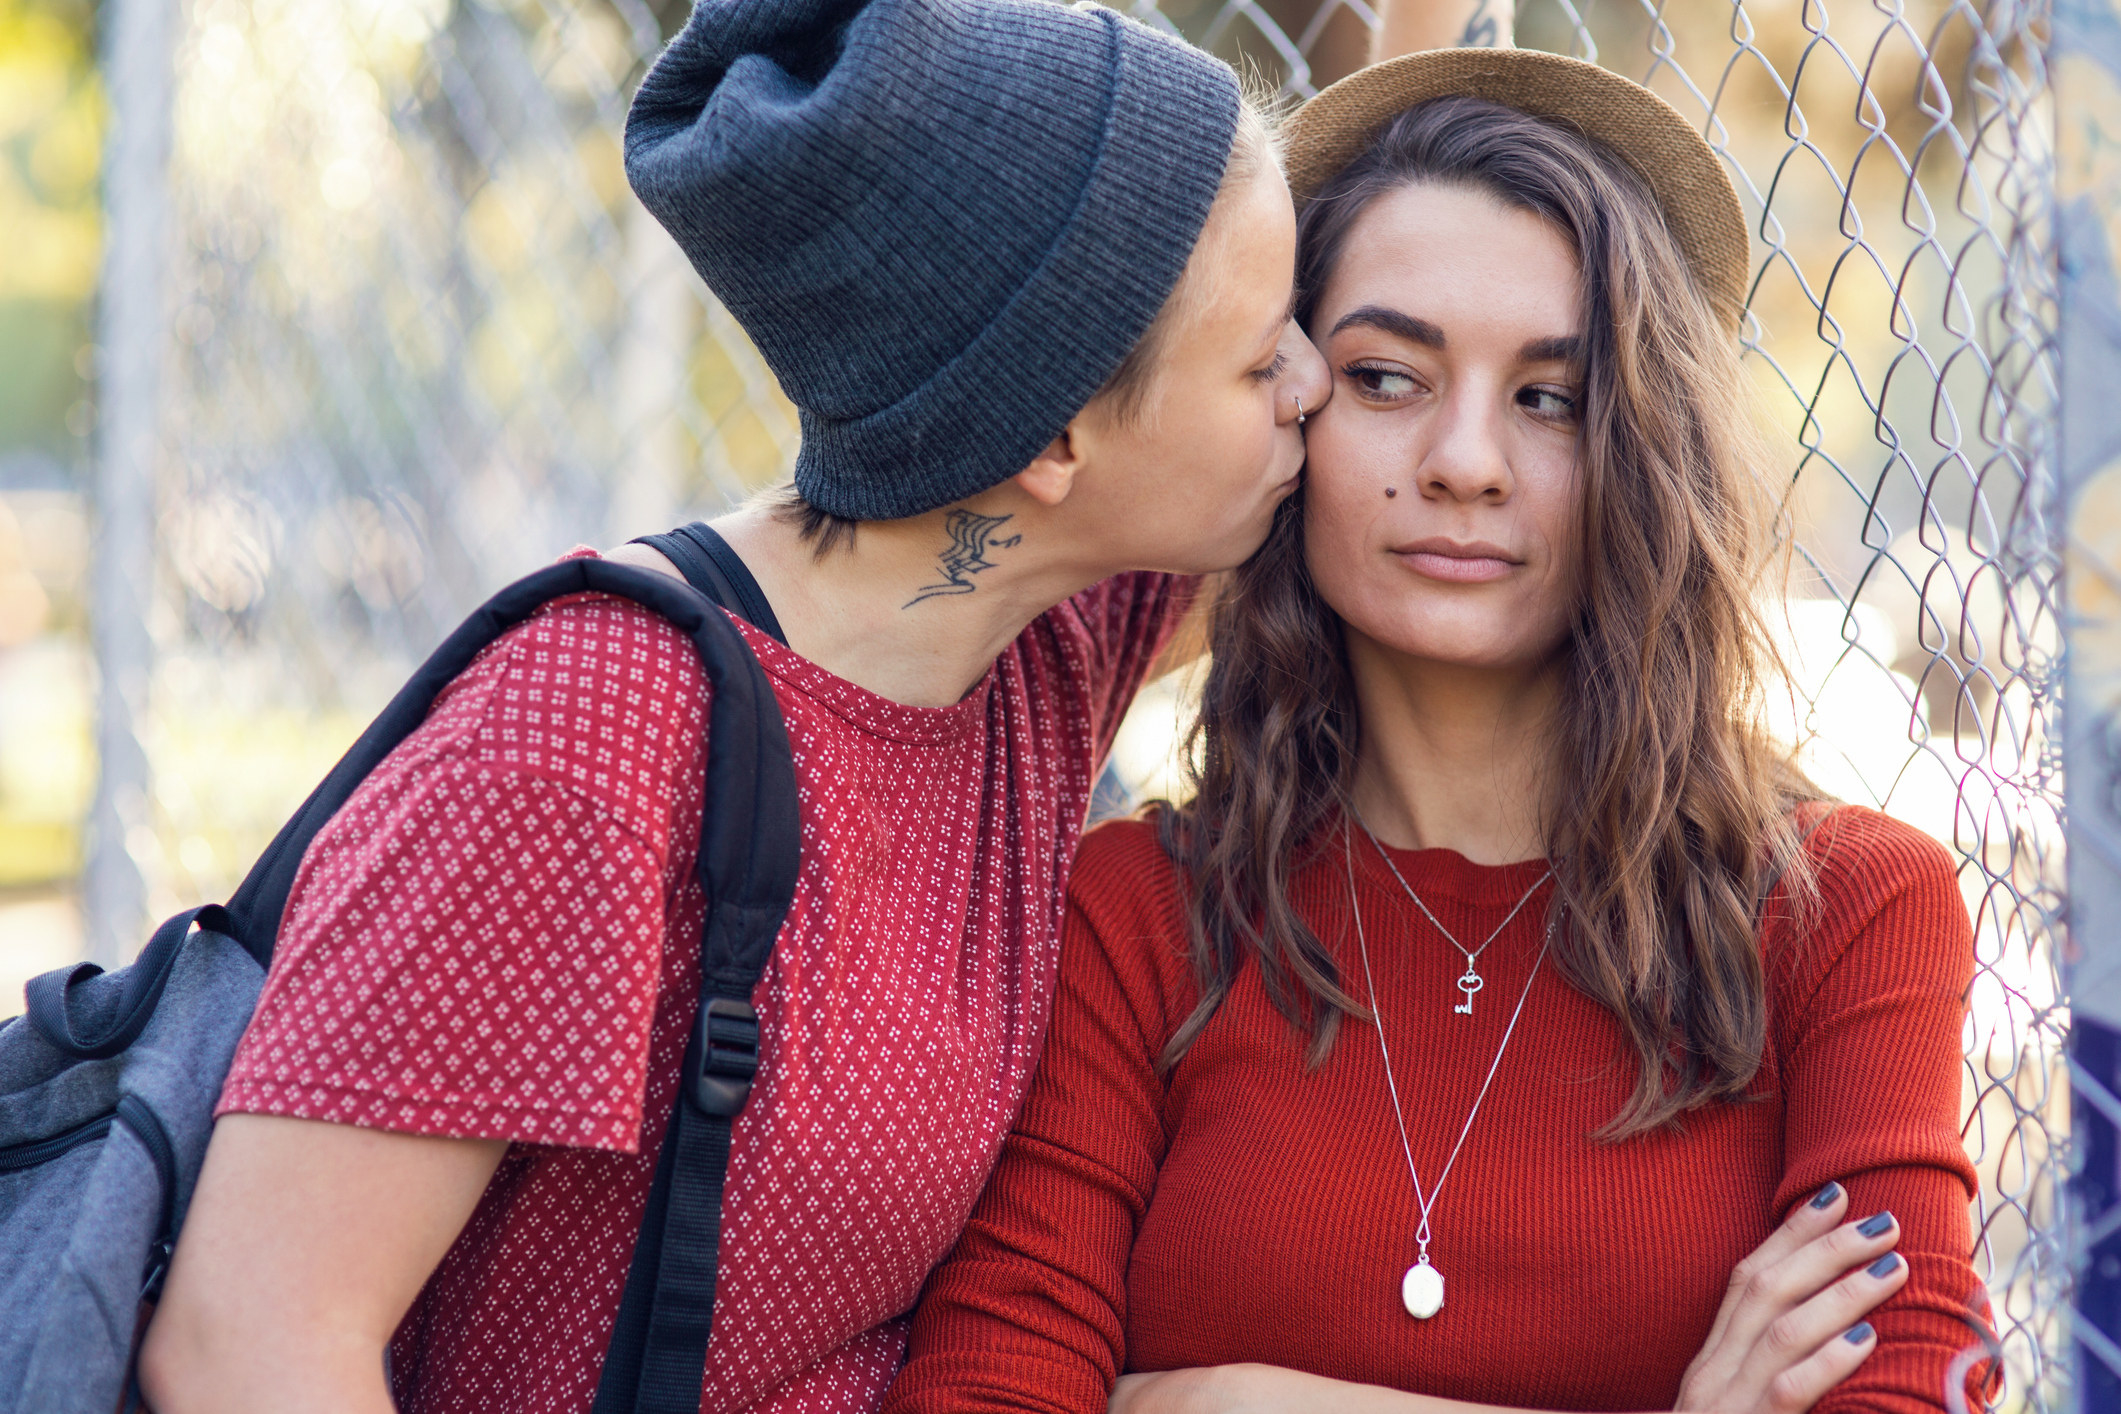 woman kissing another woman on the cheek